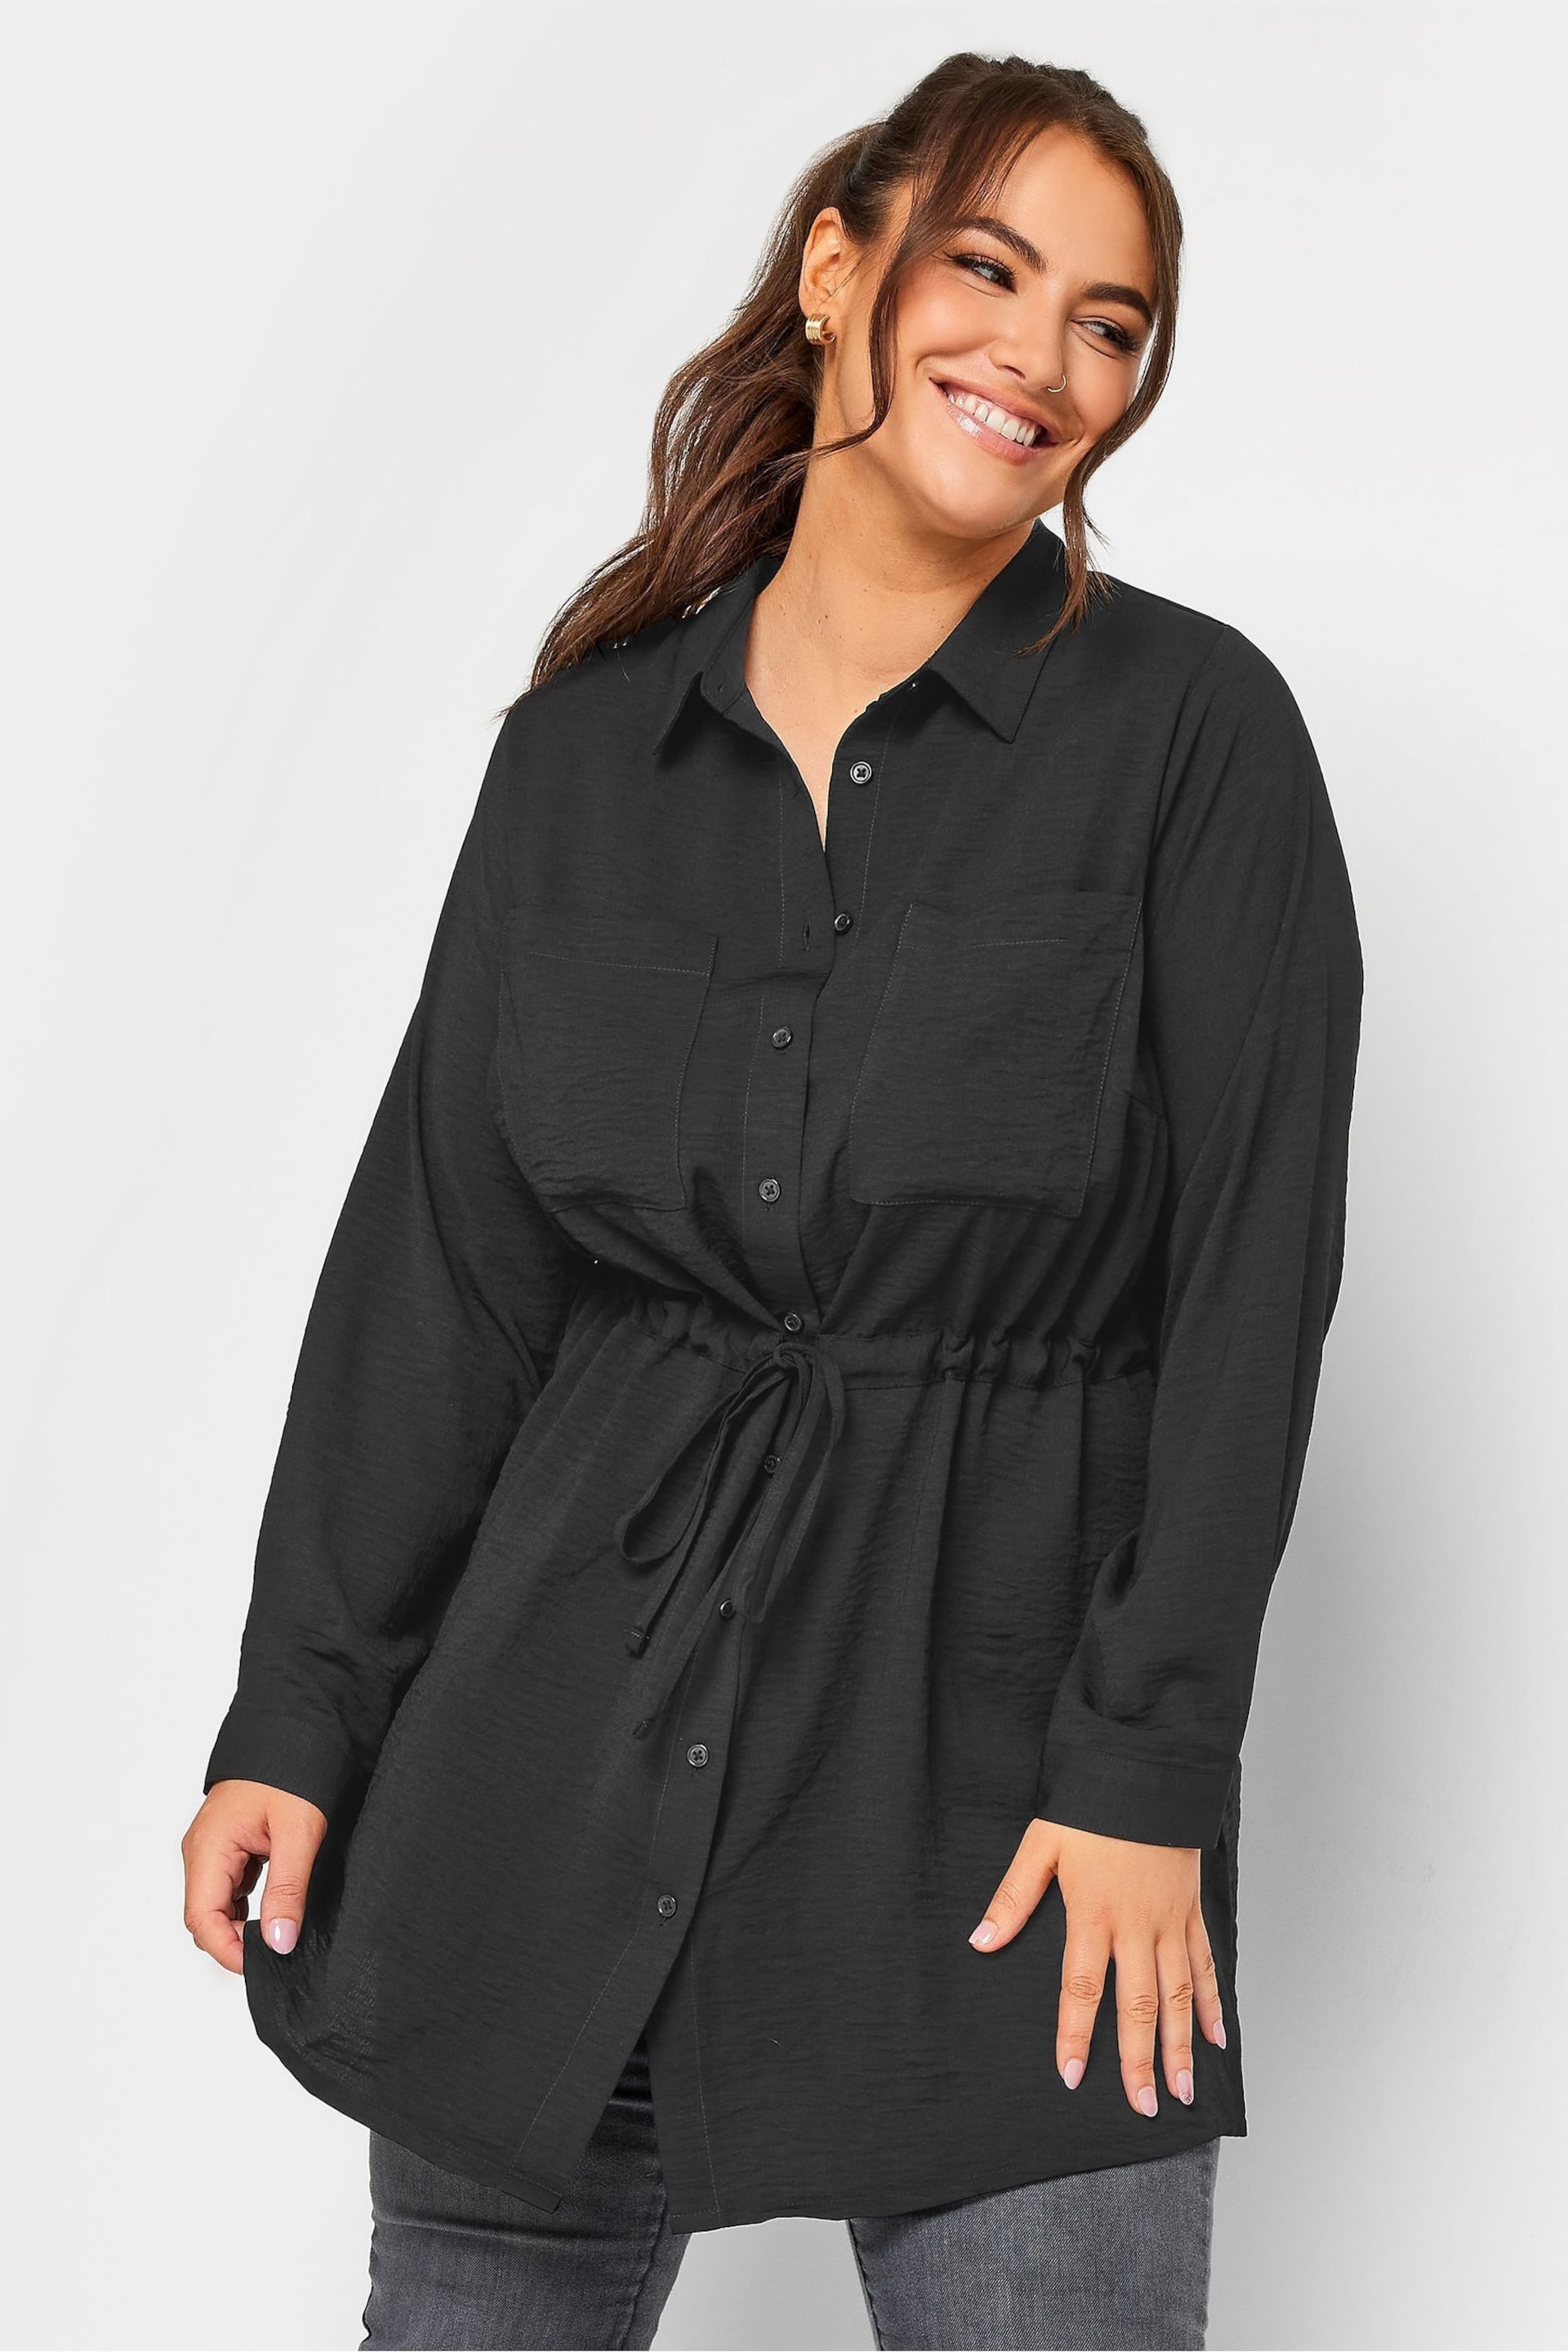 Yours Curve Black Utility Tunic - Image 1 of 4